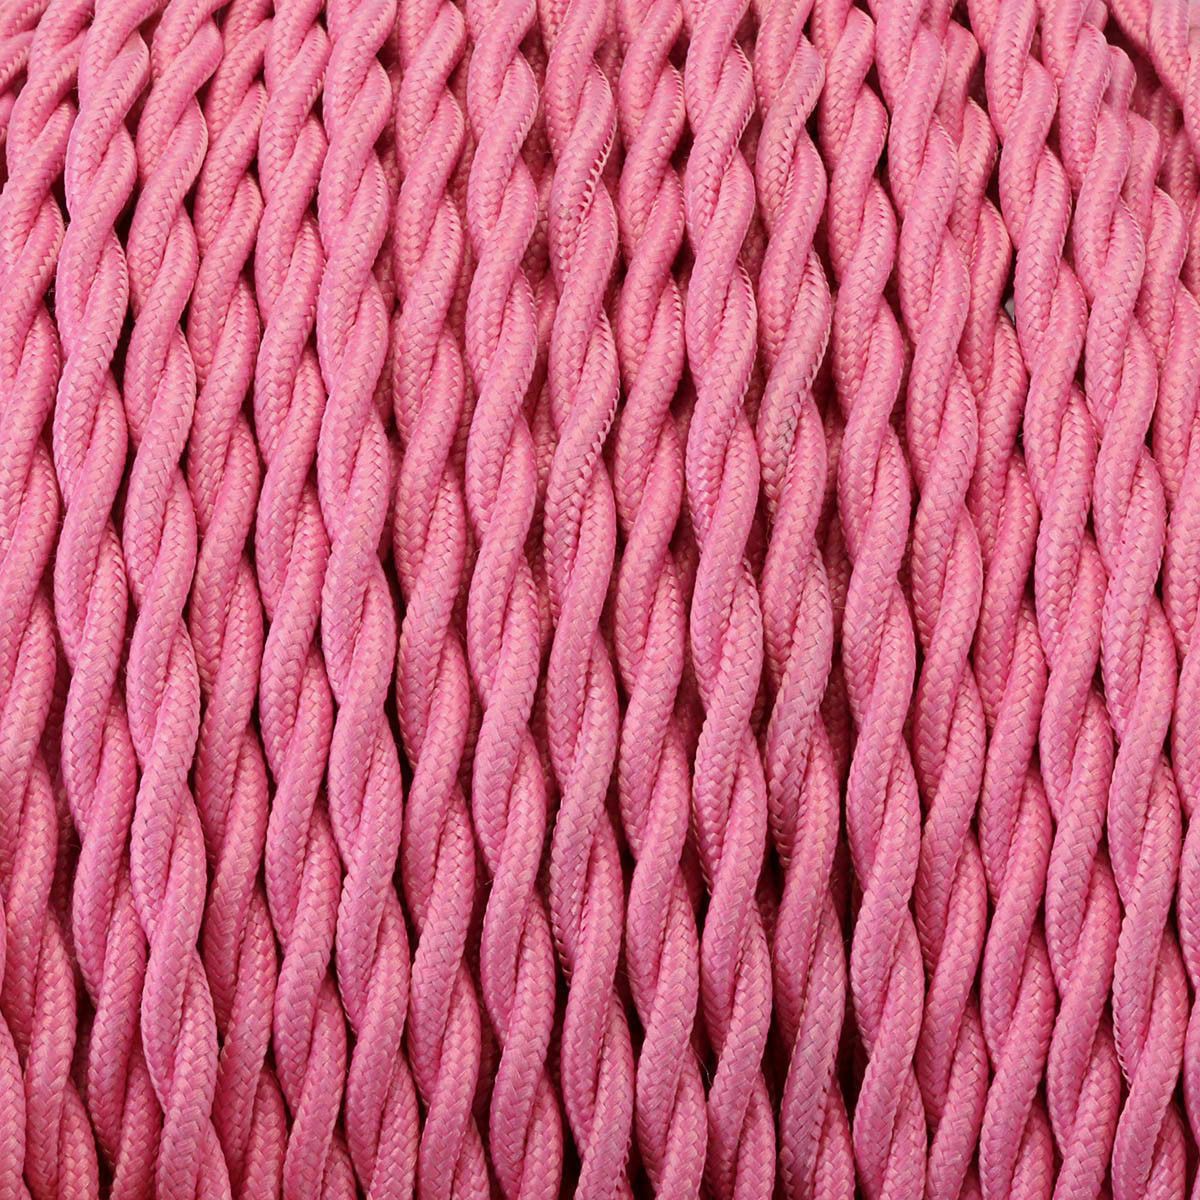 3 Core Braided Twisted Pink Fabric Cord